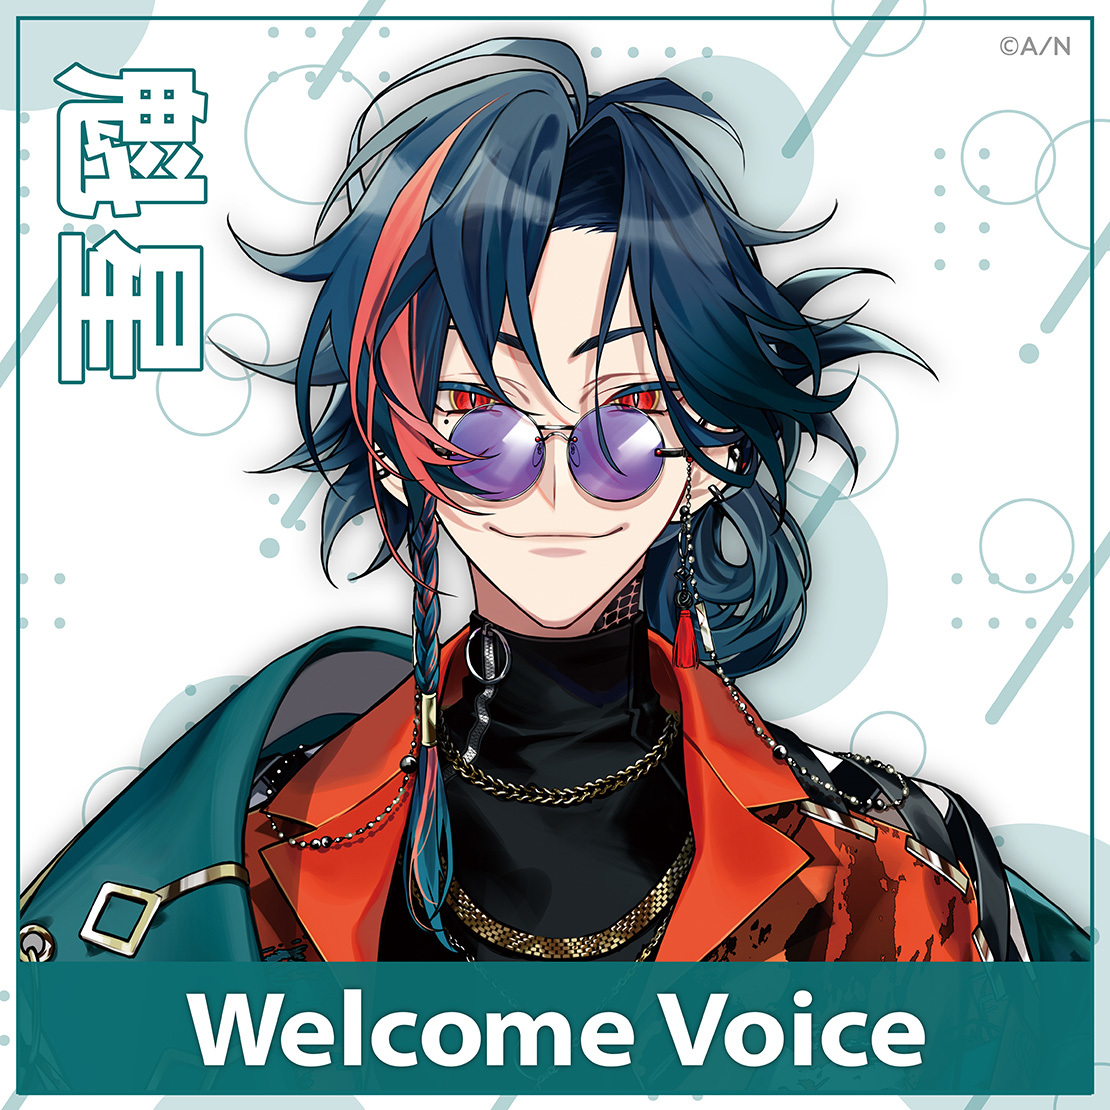 【Welcome Voice】魁星